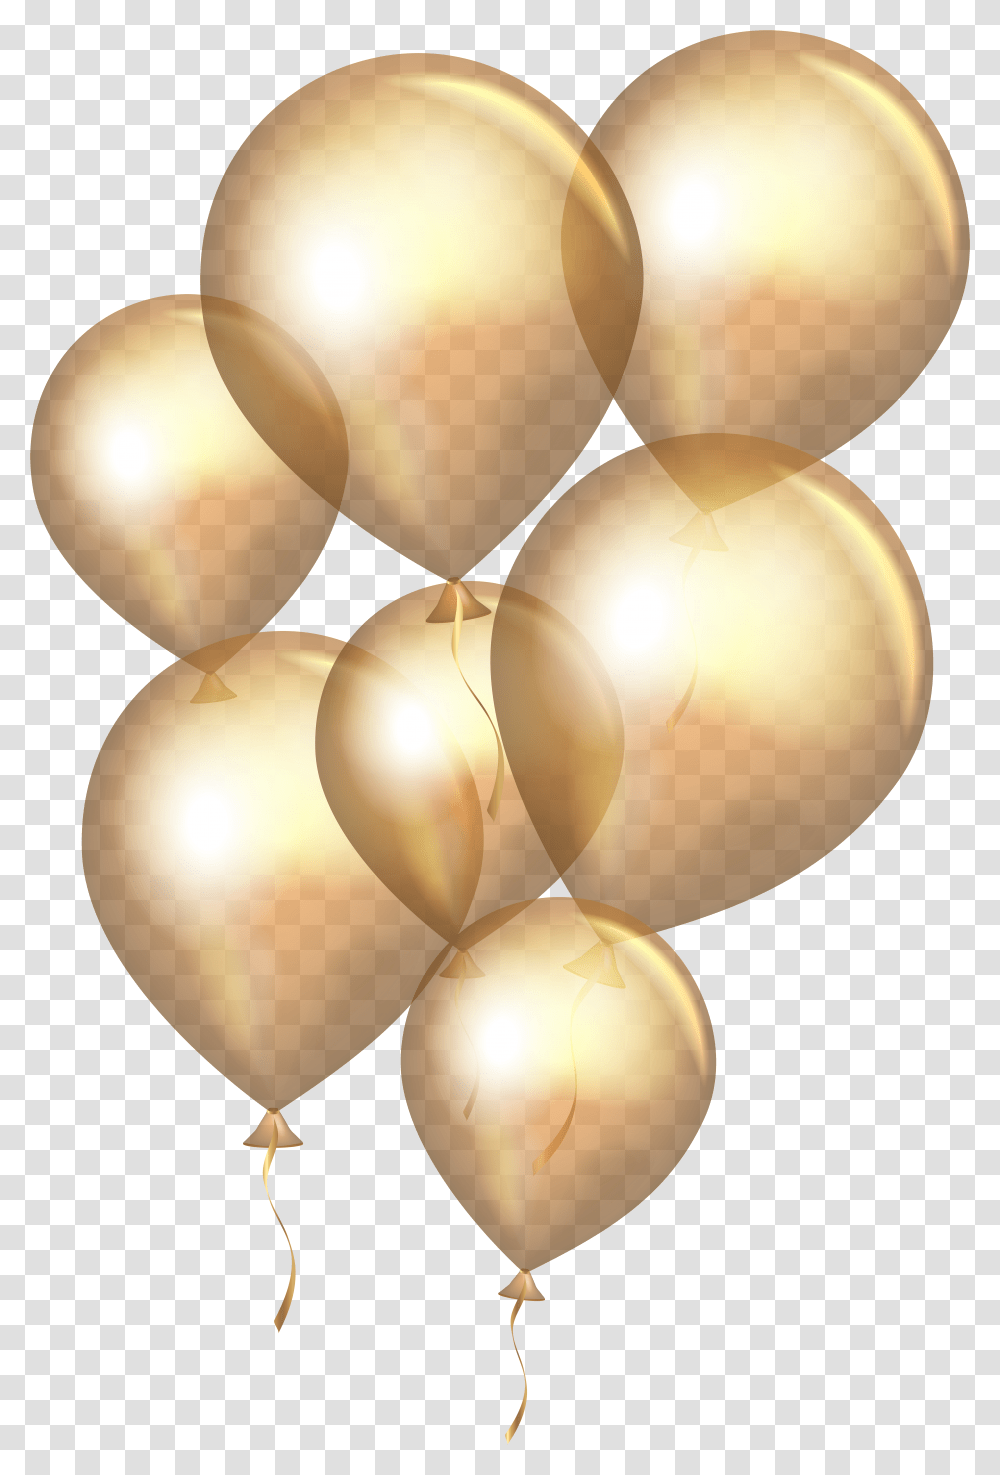 Library Of Gold Star Balloons Background Clip Background Golden Balloon Transparent Png